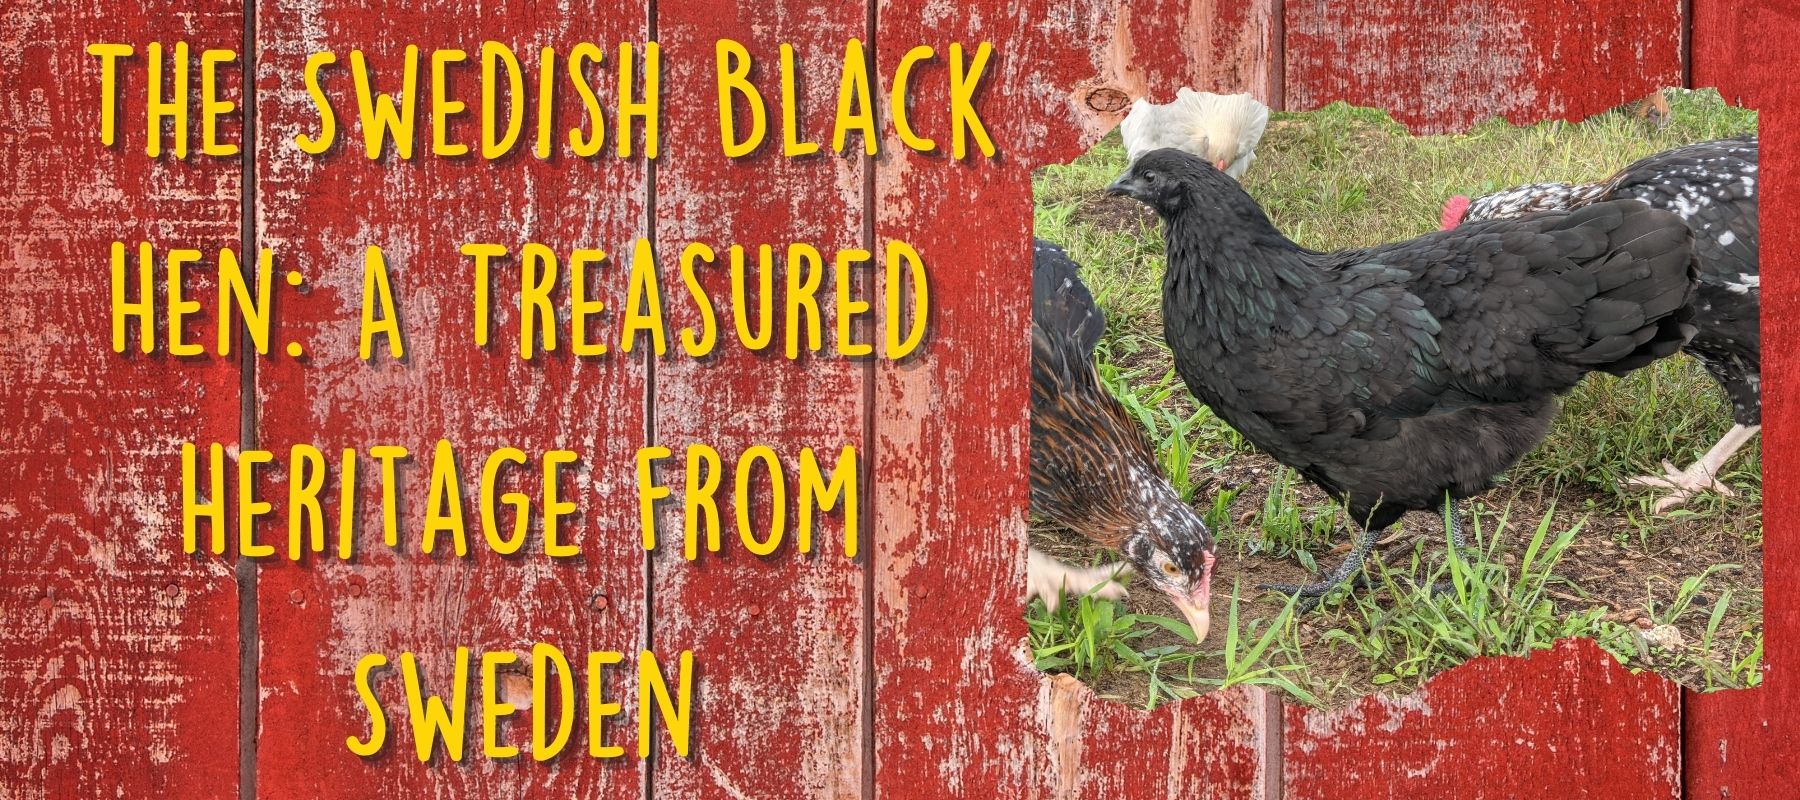  The Swedish Black Hen: A Treasured Heritage from Sweden